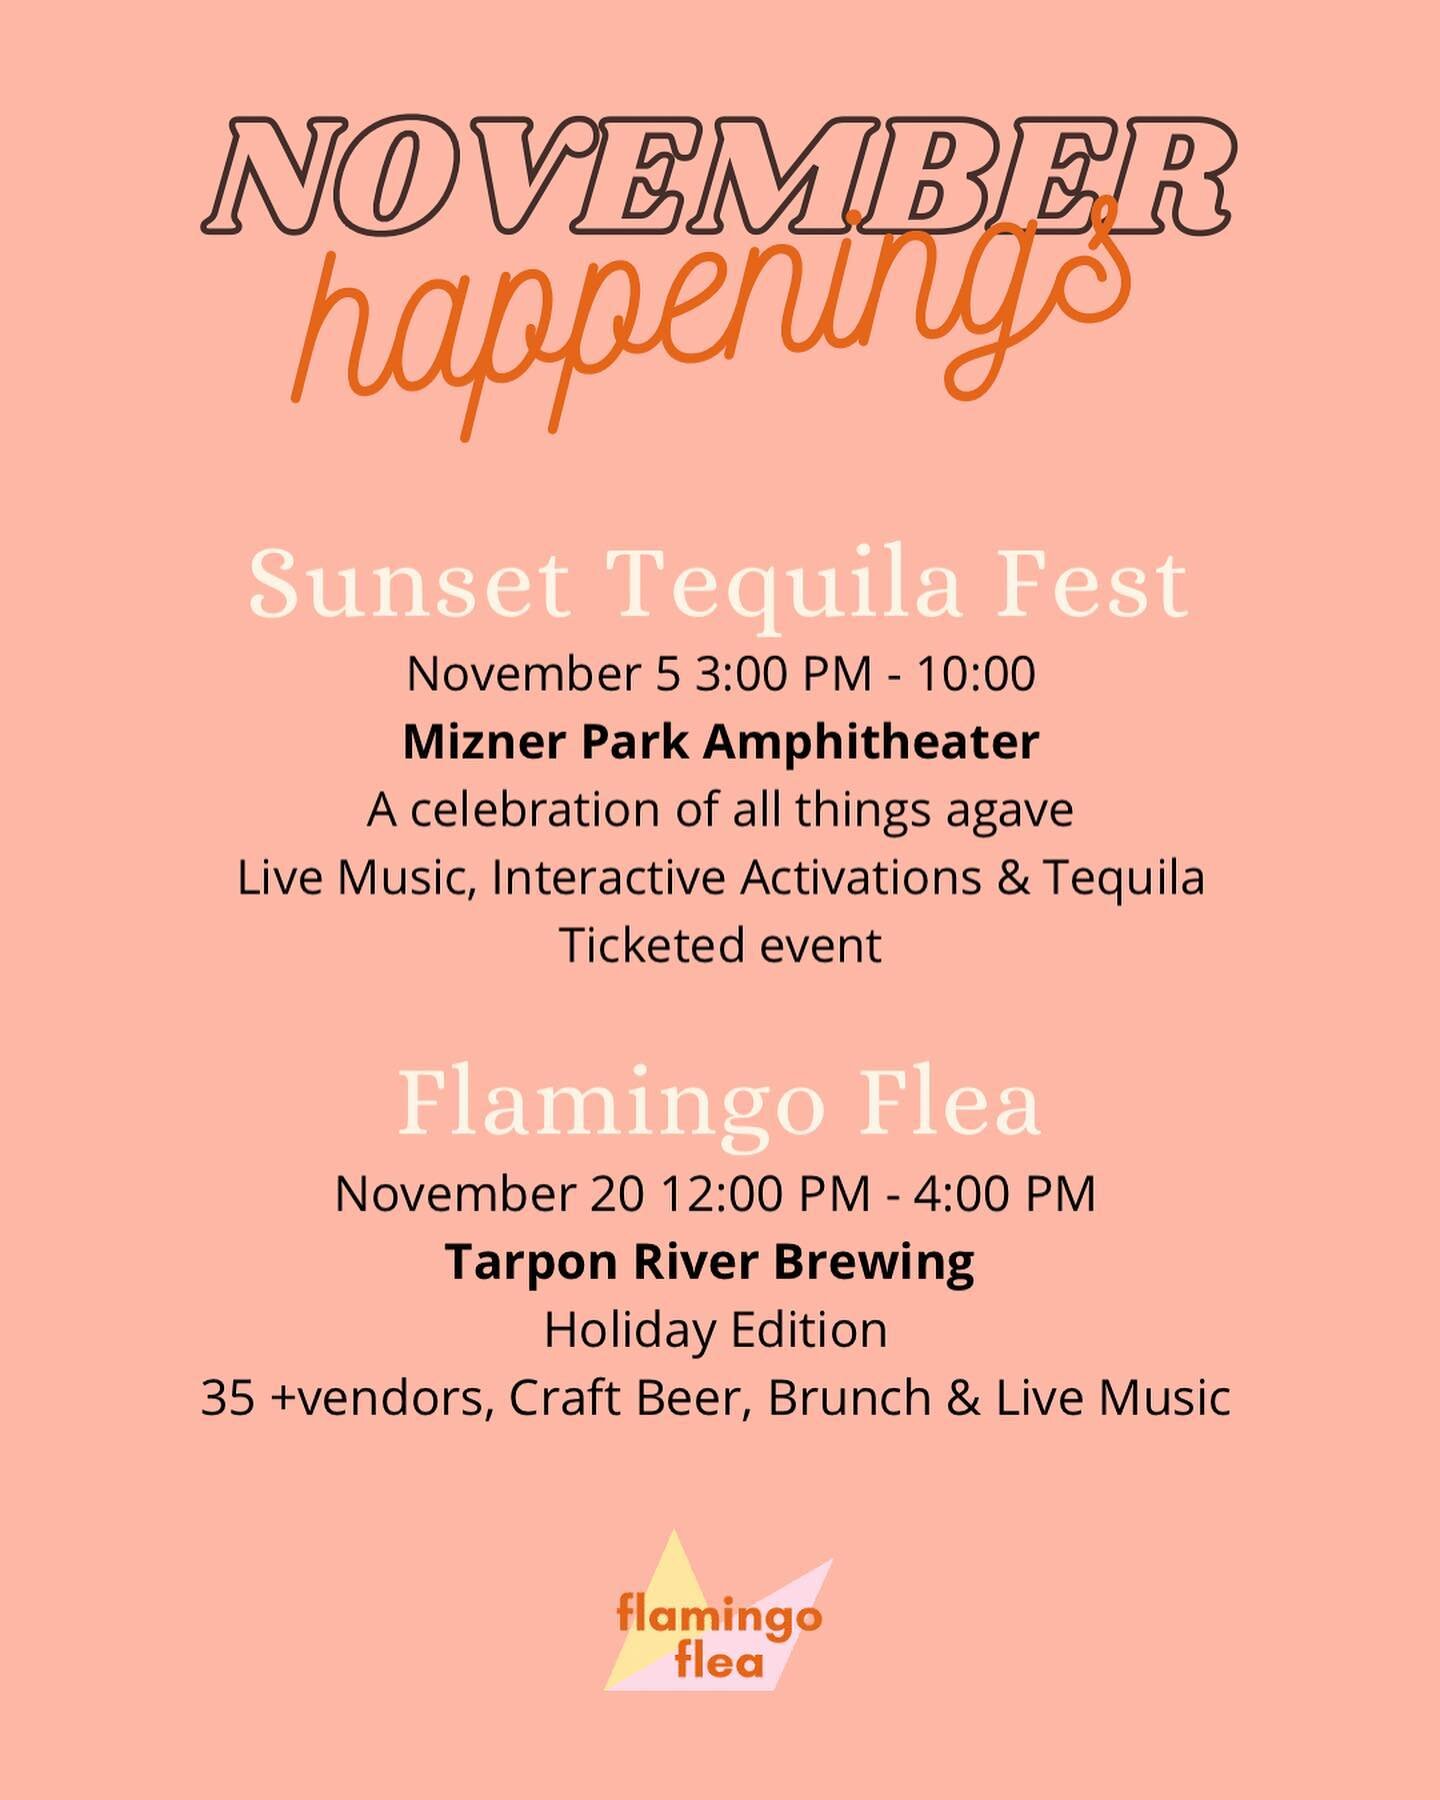 HELLO NOVEMBER 🦃🍁cue alllll of the events. Swipe and tap the &hellip; to see the full list. 

Sunset Tequila Fest - @sunsettequilafest 
November 5 3:00 PM - 10:00
Miner Park Amphitheater
A celebration of all things agave
Live Music, Interactive Act